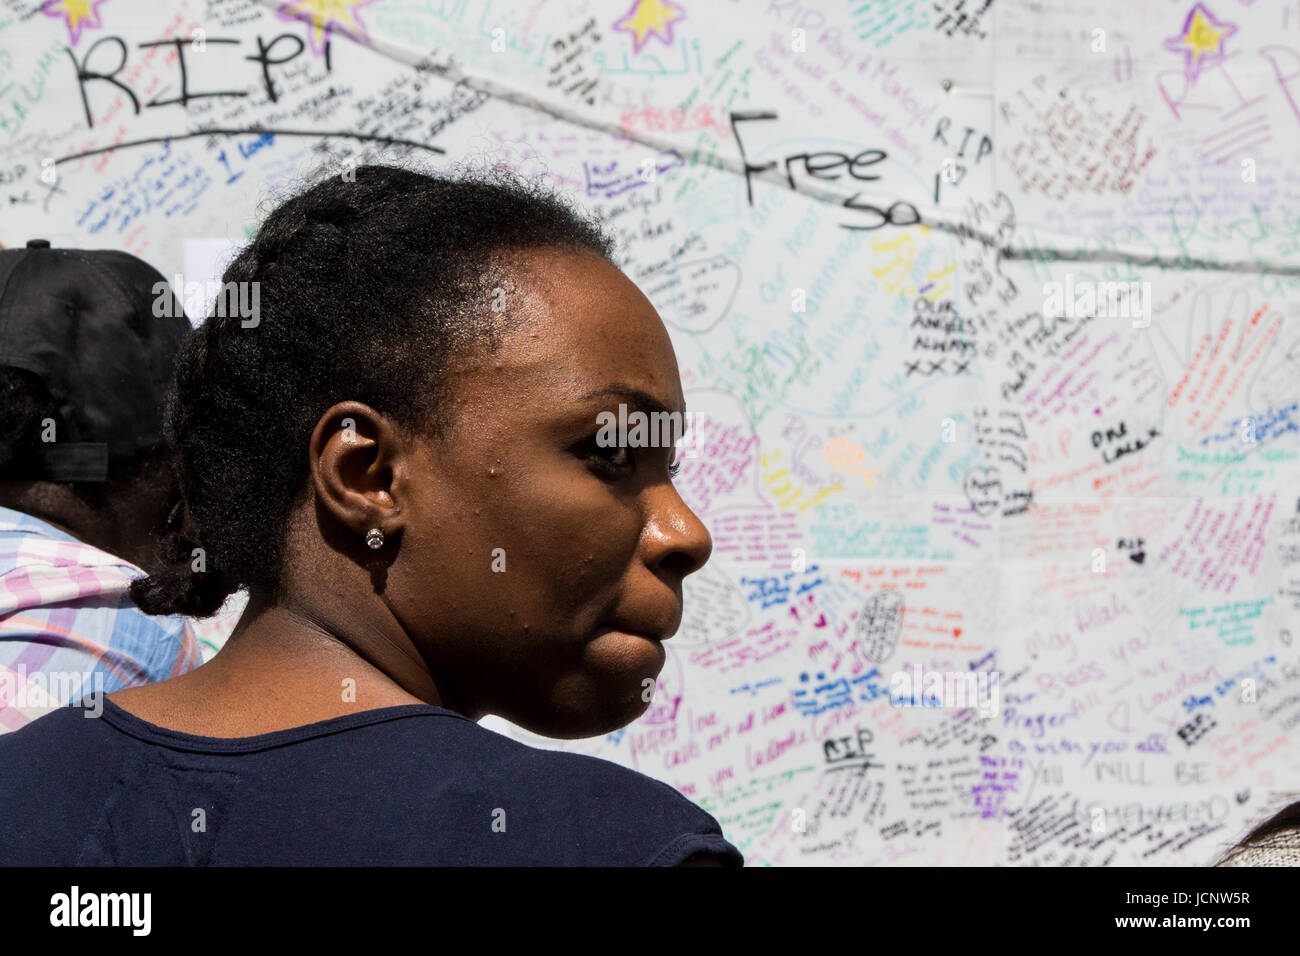 London, UK. 16th June, 2017. The Notting Hill community mourns the victims and comes together to help those who lost everything after the Grenfell Tower fire on Wednesday. Credit: Bettina Strenske/Alamy Live News Stock Photo